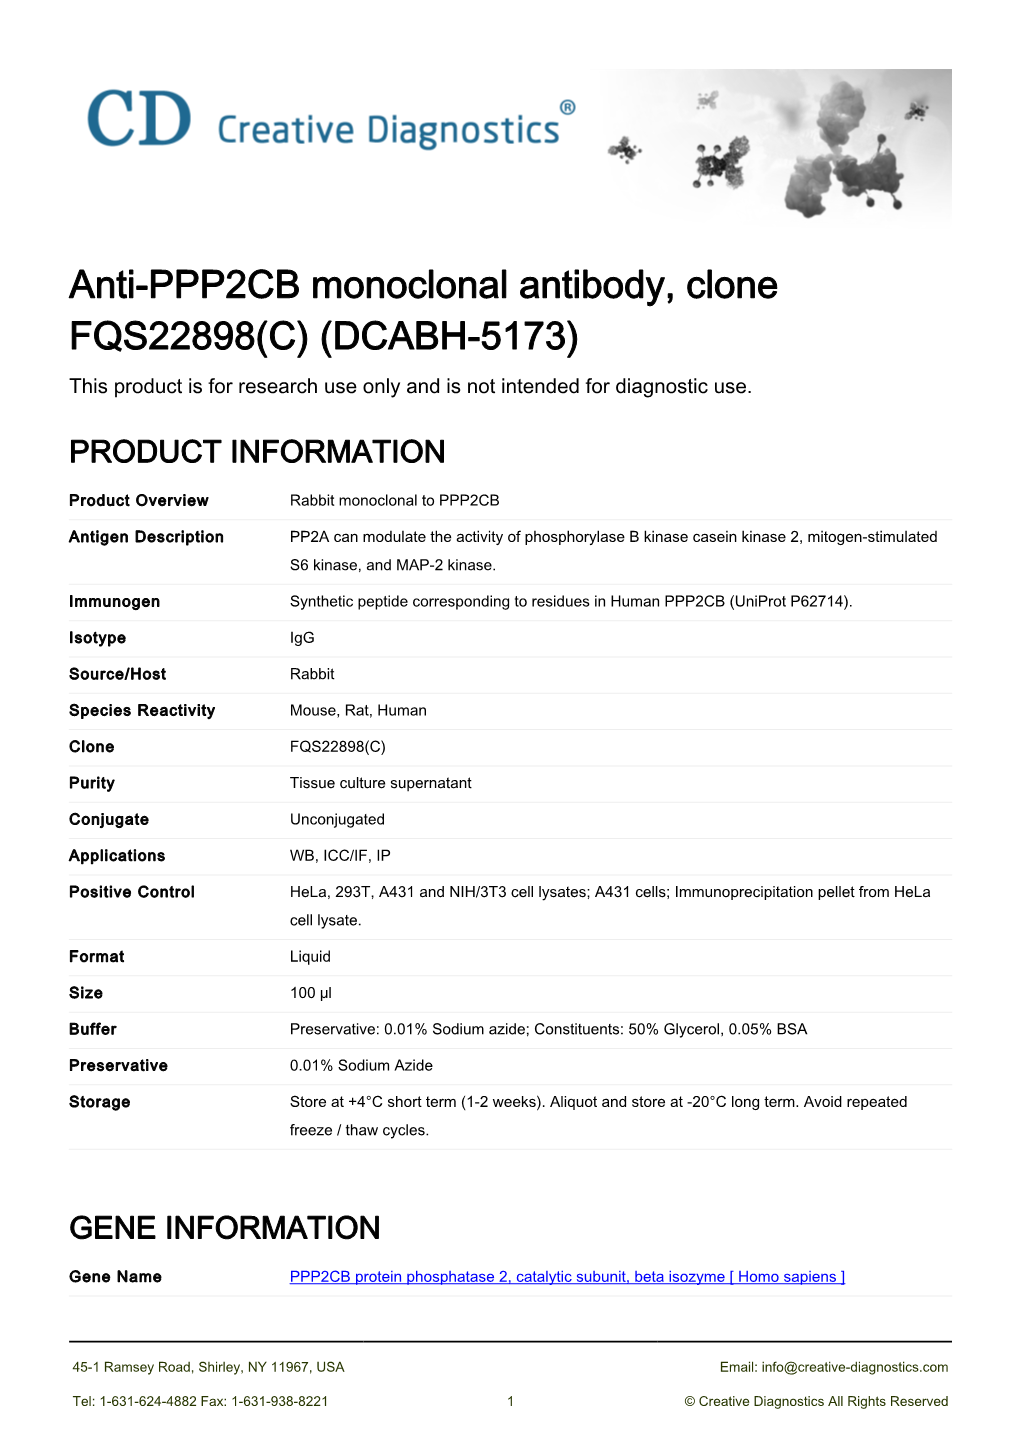 Anti-PPP2CB Monoclonal Antibody, Clone FQS22898(C) (DCABH-5173) This Product Is for Research Use Only and Is Not Intended for Diagnostic Use